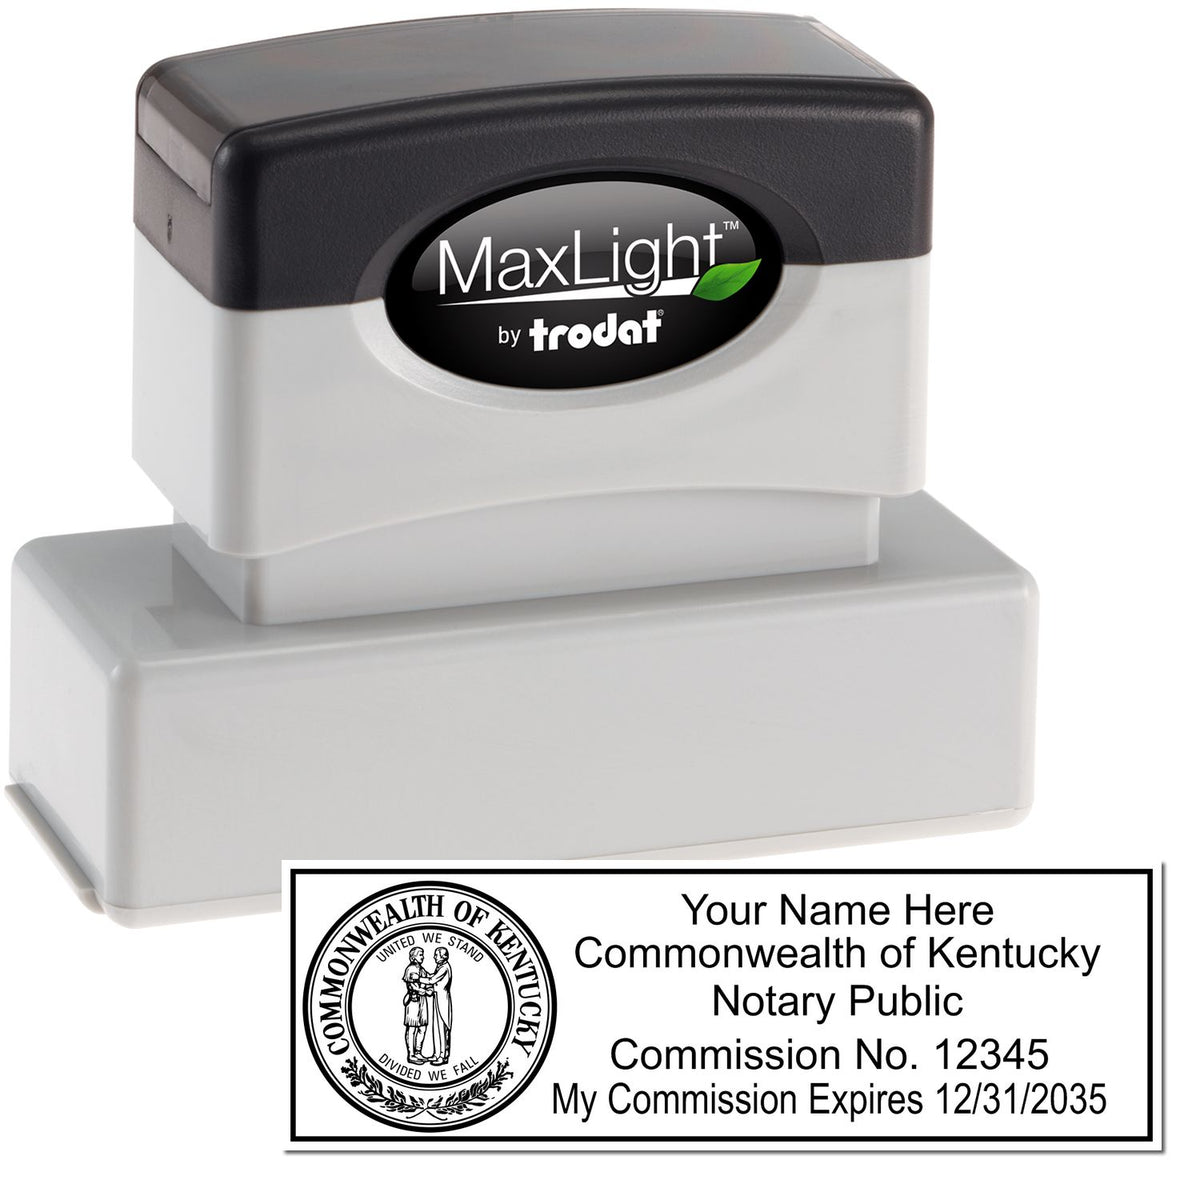 The main image for the MaxLight Premium Pre-Inked Kentucky State Seal Notarial Stamp depicting a sample of the imprint and electronic files